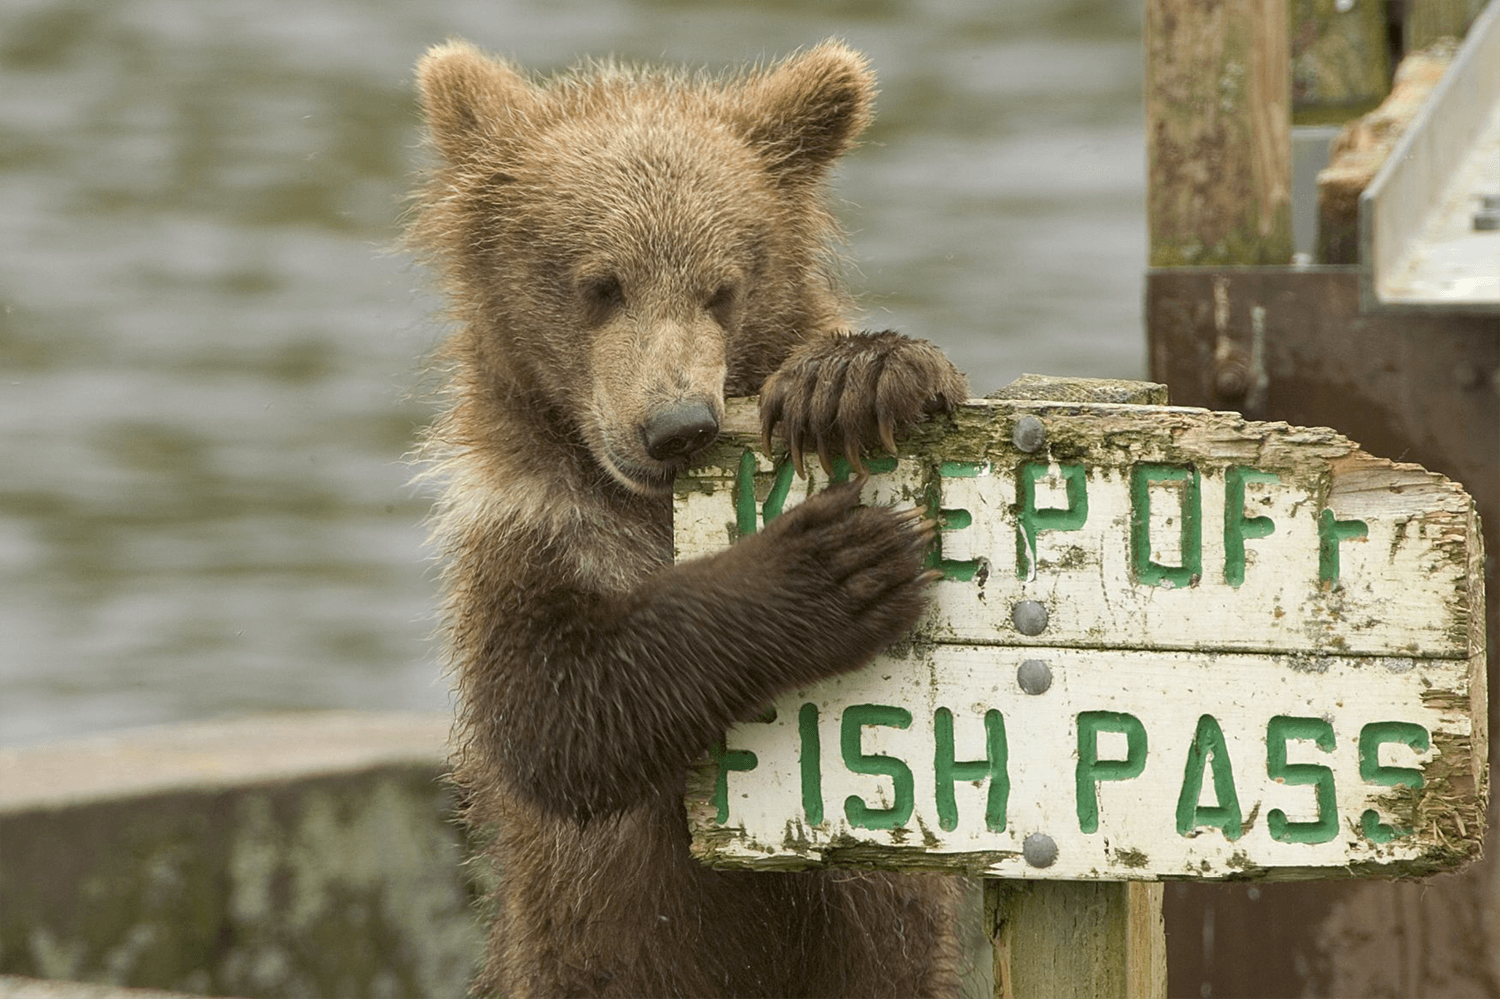 A curious bear nibbles at a sign to investigate the smell